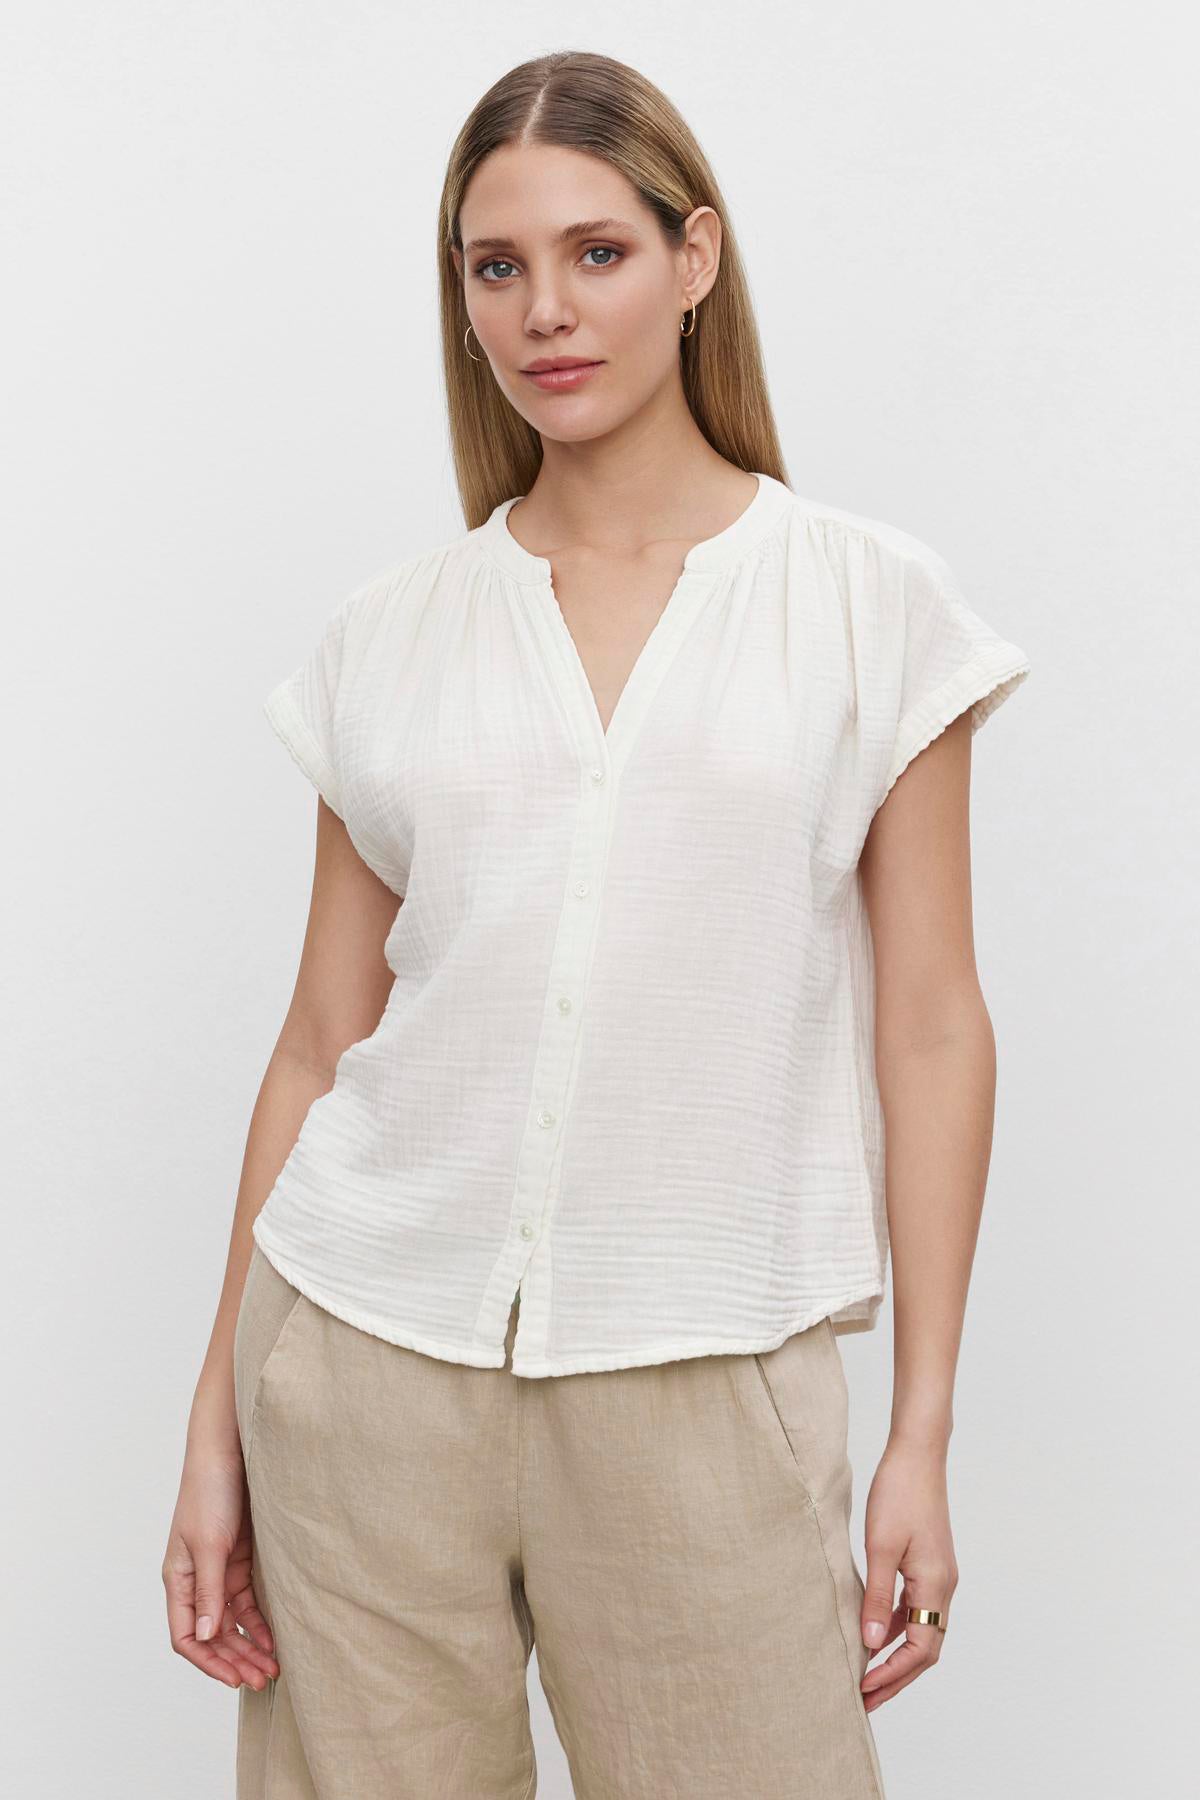   Woman in a Velvet by Graham & Spencer PAMELA COTTON GAUZE BUTTON-UP TOP white blouse and beige trousers standing against a plain background. 